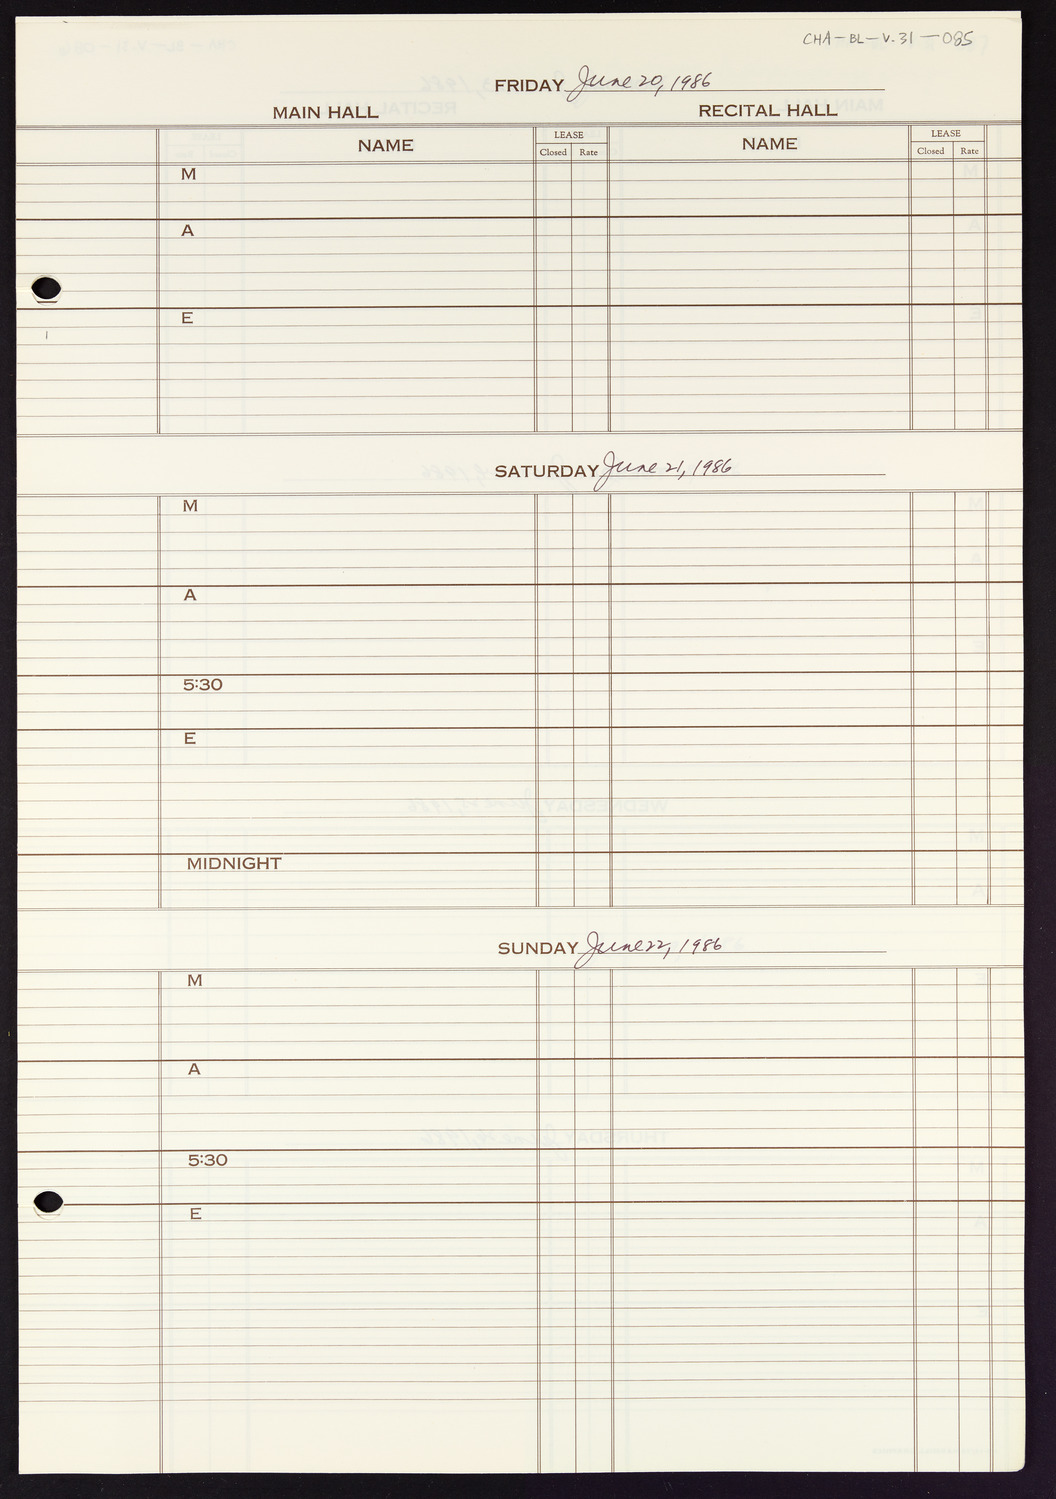 Carnegie Hall Booking Ledger, volume 31, page 85